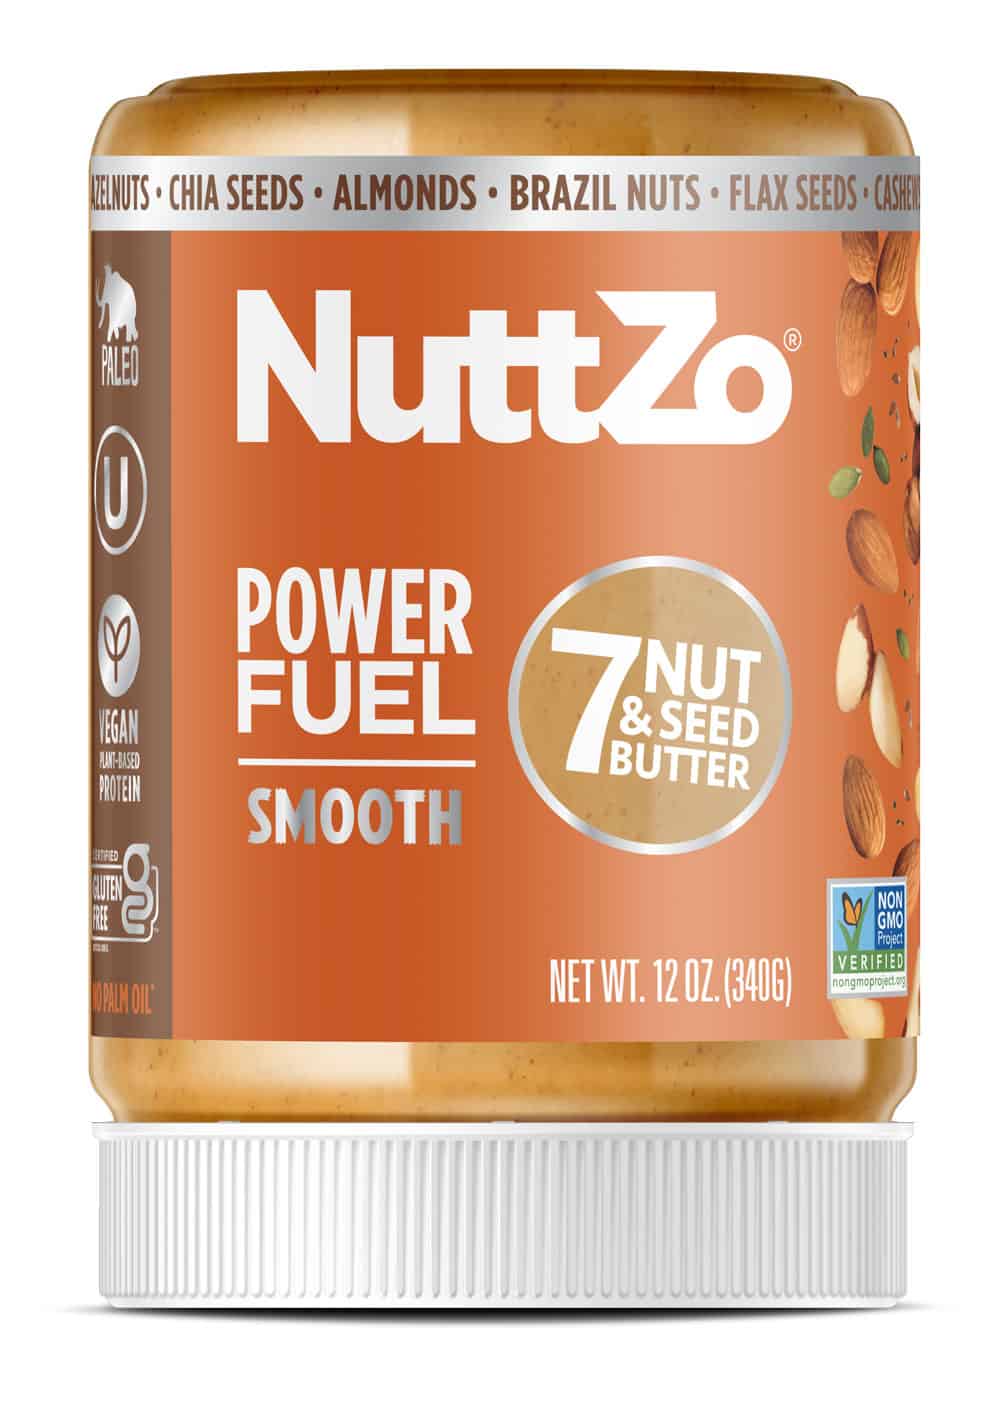 NuttZo Power Fuel Smooth - Natural 6 units per case 12.0 oz